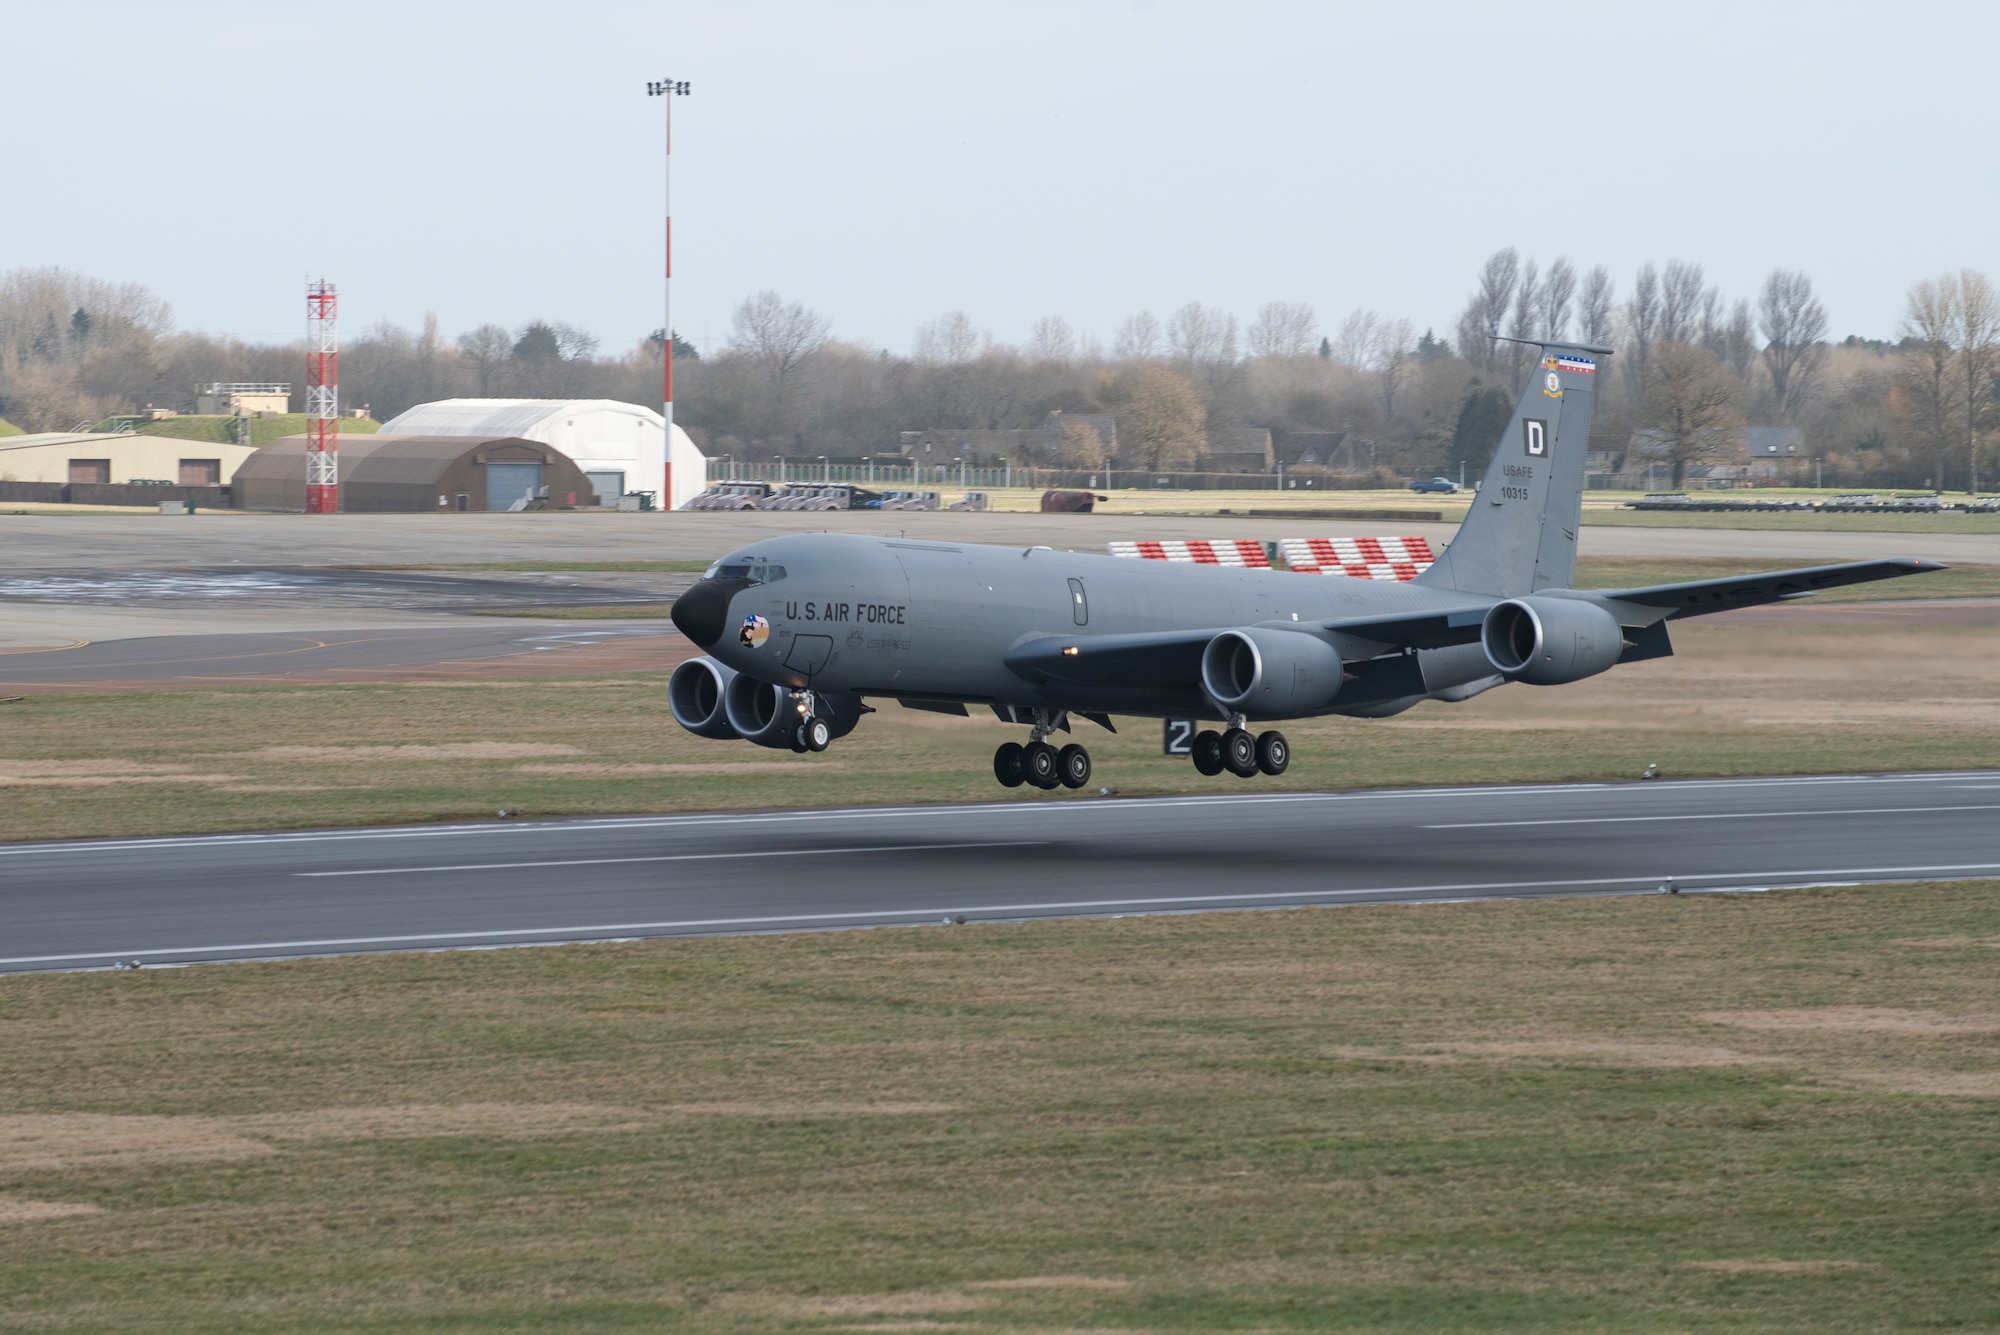 A U.S. Air Force KC-135 Stratotanker aircraft assigned to the 100th Air Refueling Wing, lands at Royal Air Force Fairford, England, during the Baltic Trident Exercise, March 15, 2021. U.S. forces in Europe continuously strengthen our alliances and partnerships to create a networked security architecture capable of deterring aggression and maintaining stability. (U.S. Air Force photo by Senior Airman Jennifer Zima)